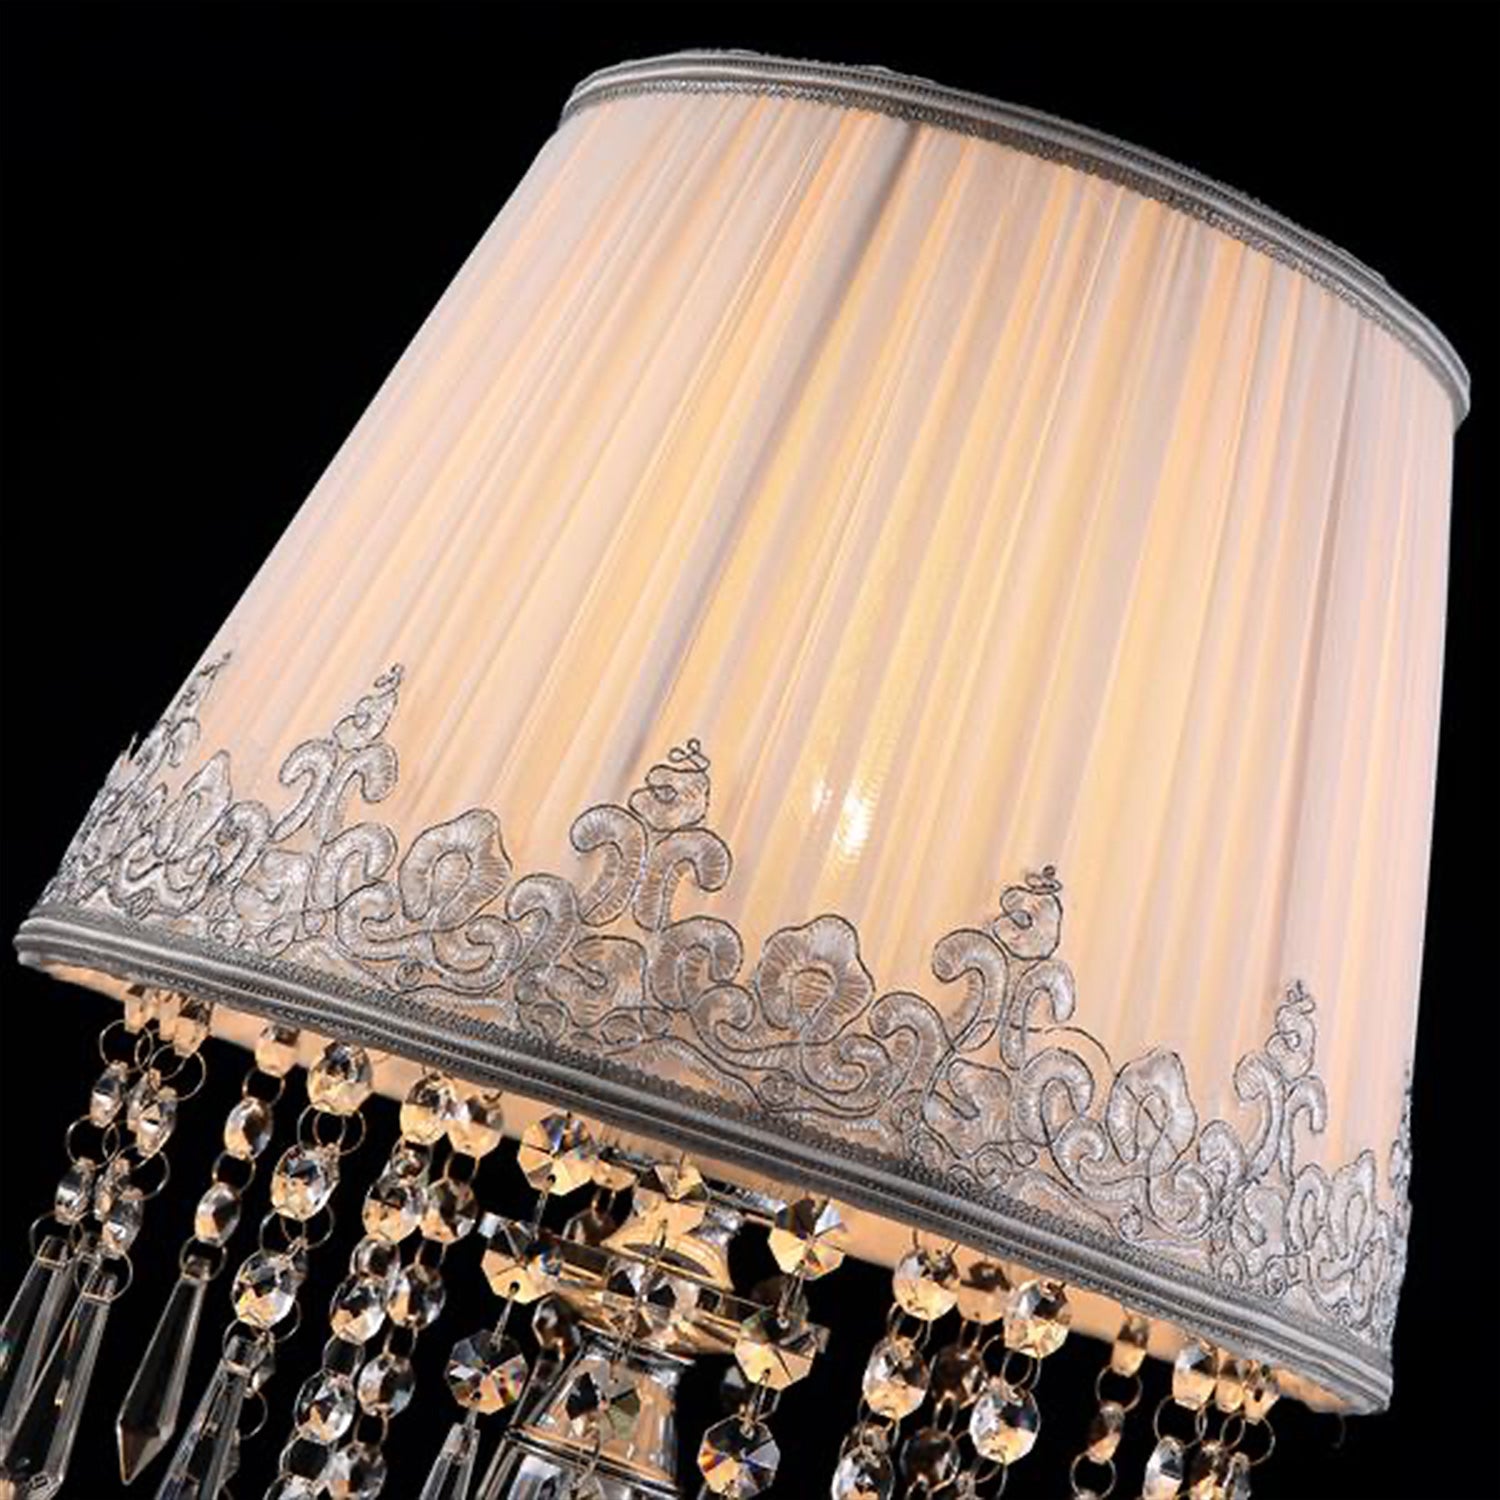 Elegant White Ruched Fabric Crystal Table Lamp - Set of 2 - details